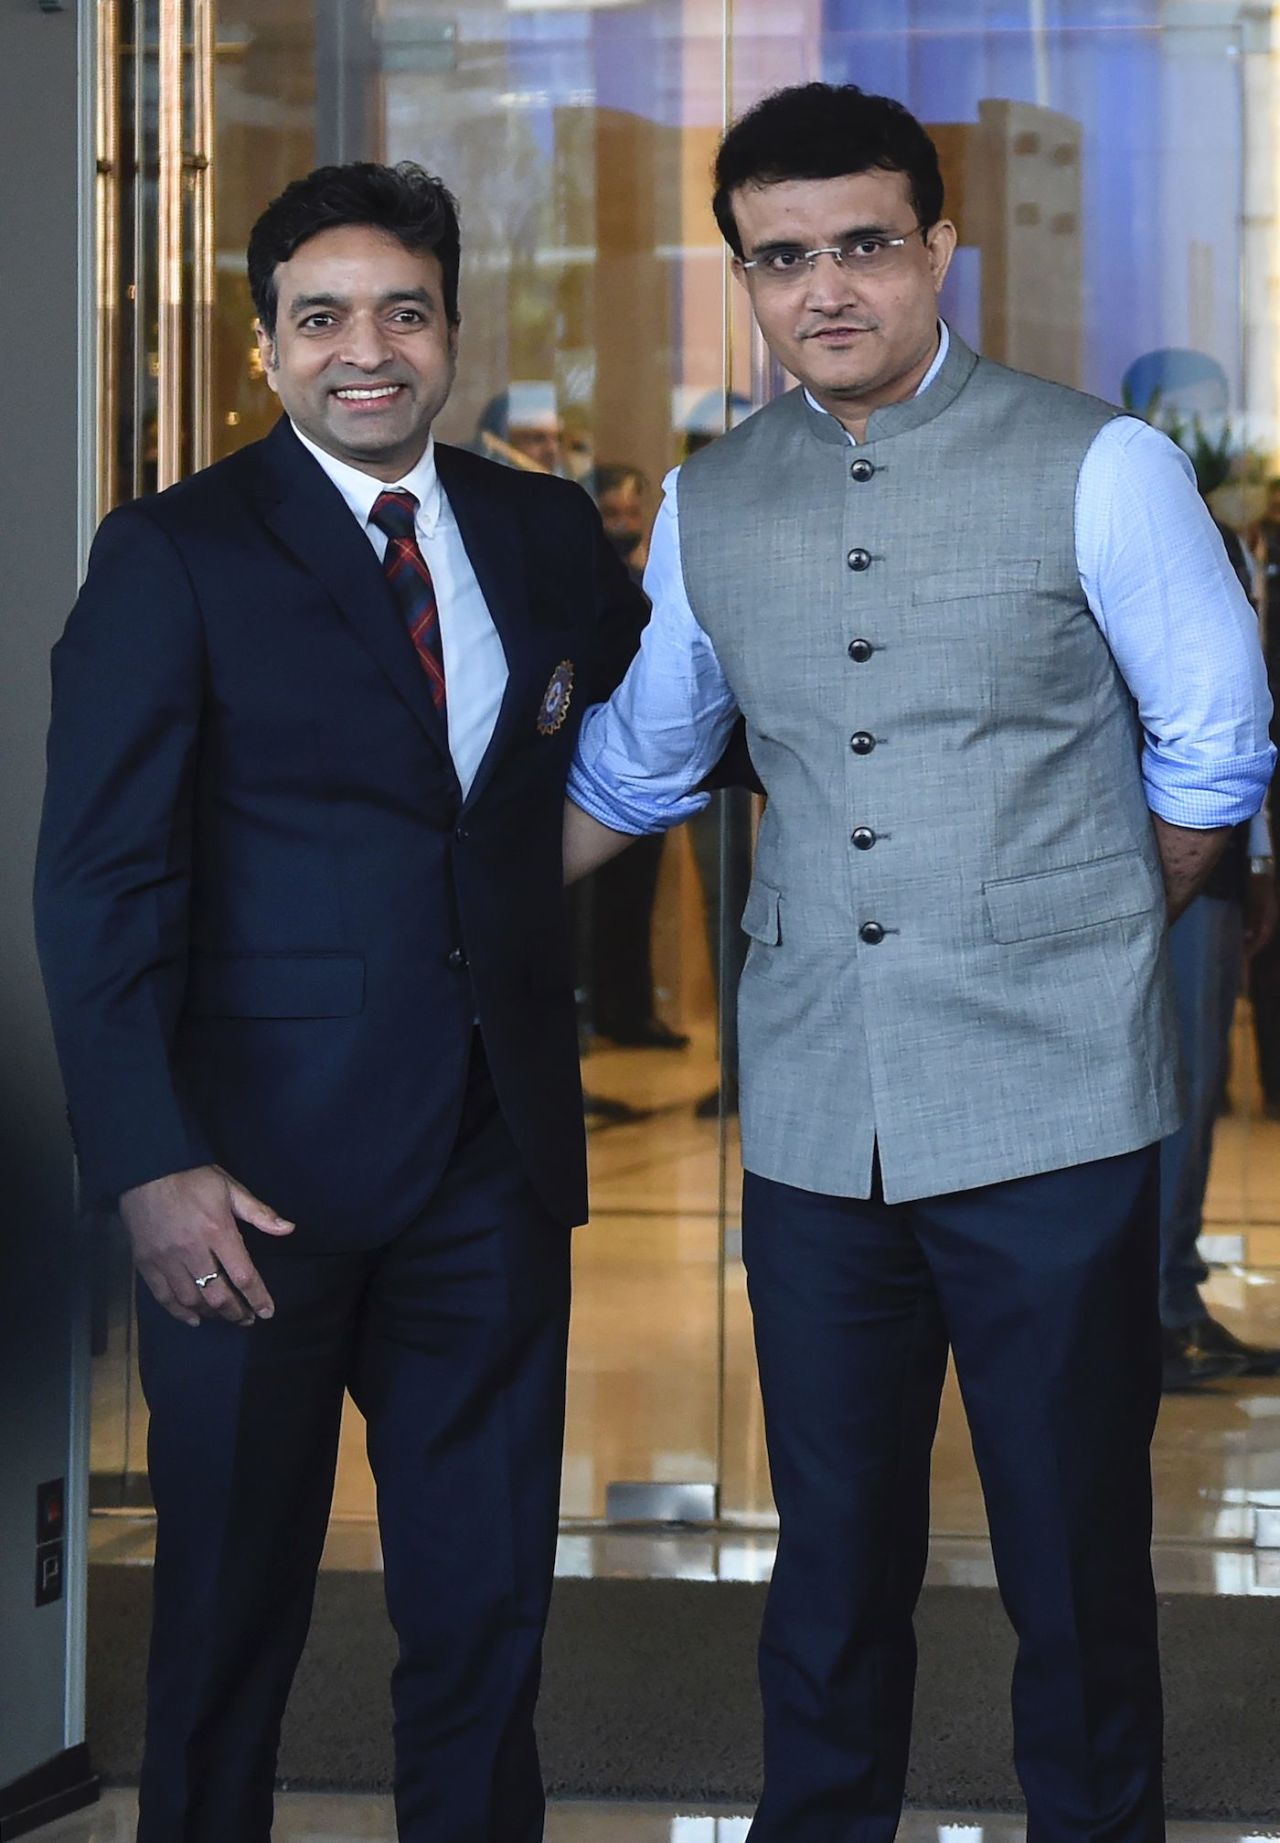 Sourav Ganguly and Arun Singh Dhumal after the conclusion of the BCCI AGM, Ahmedabad, December 24, 2020